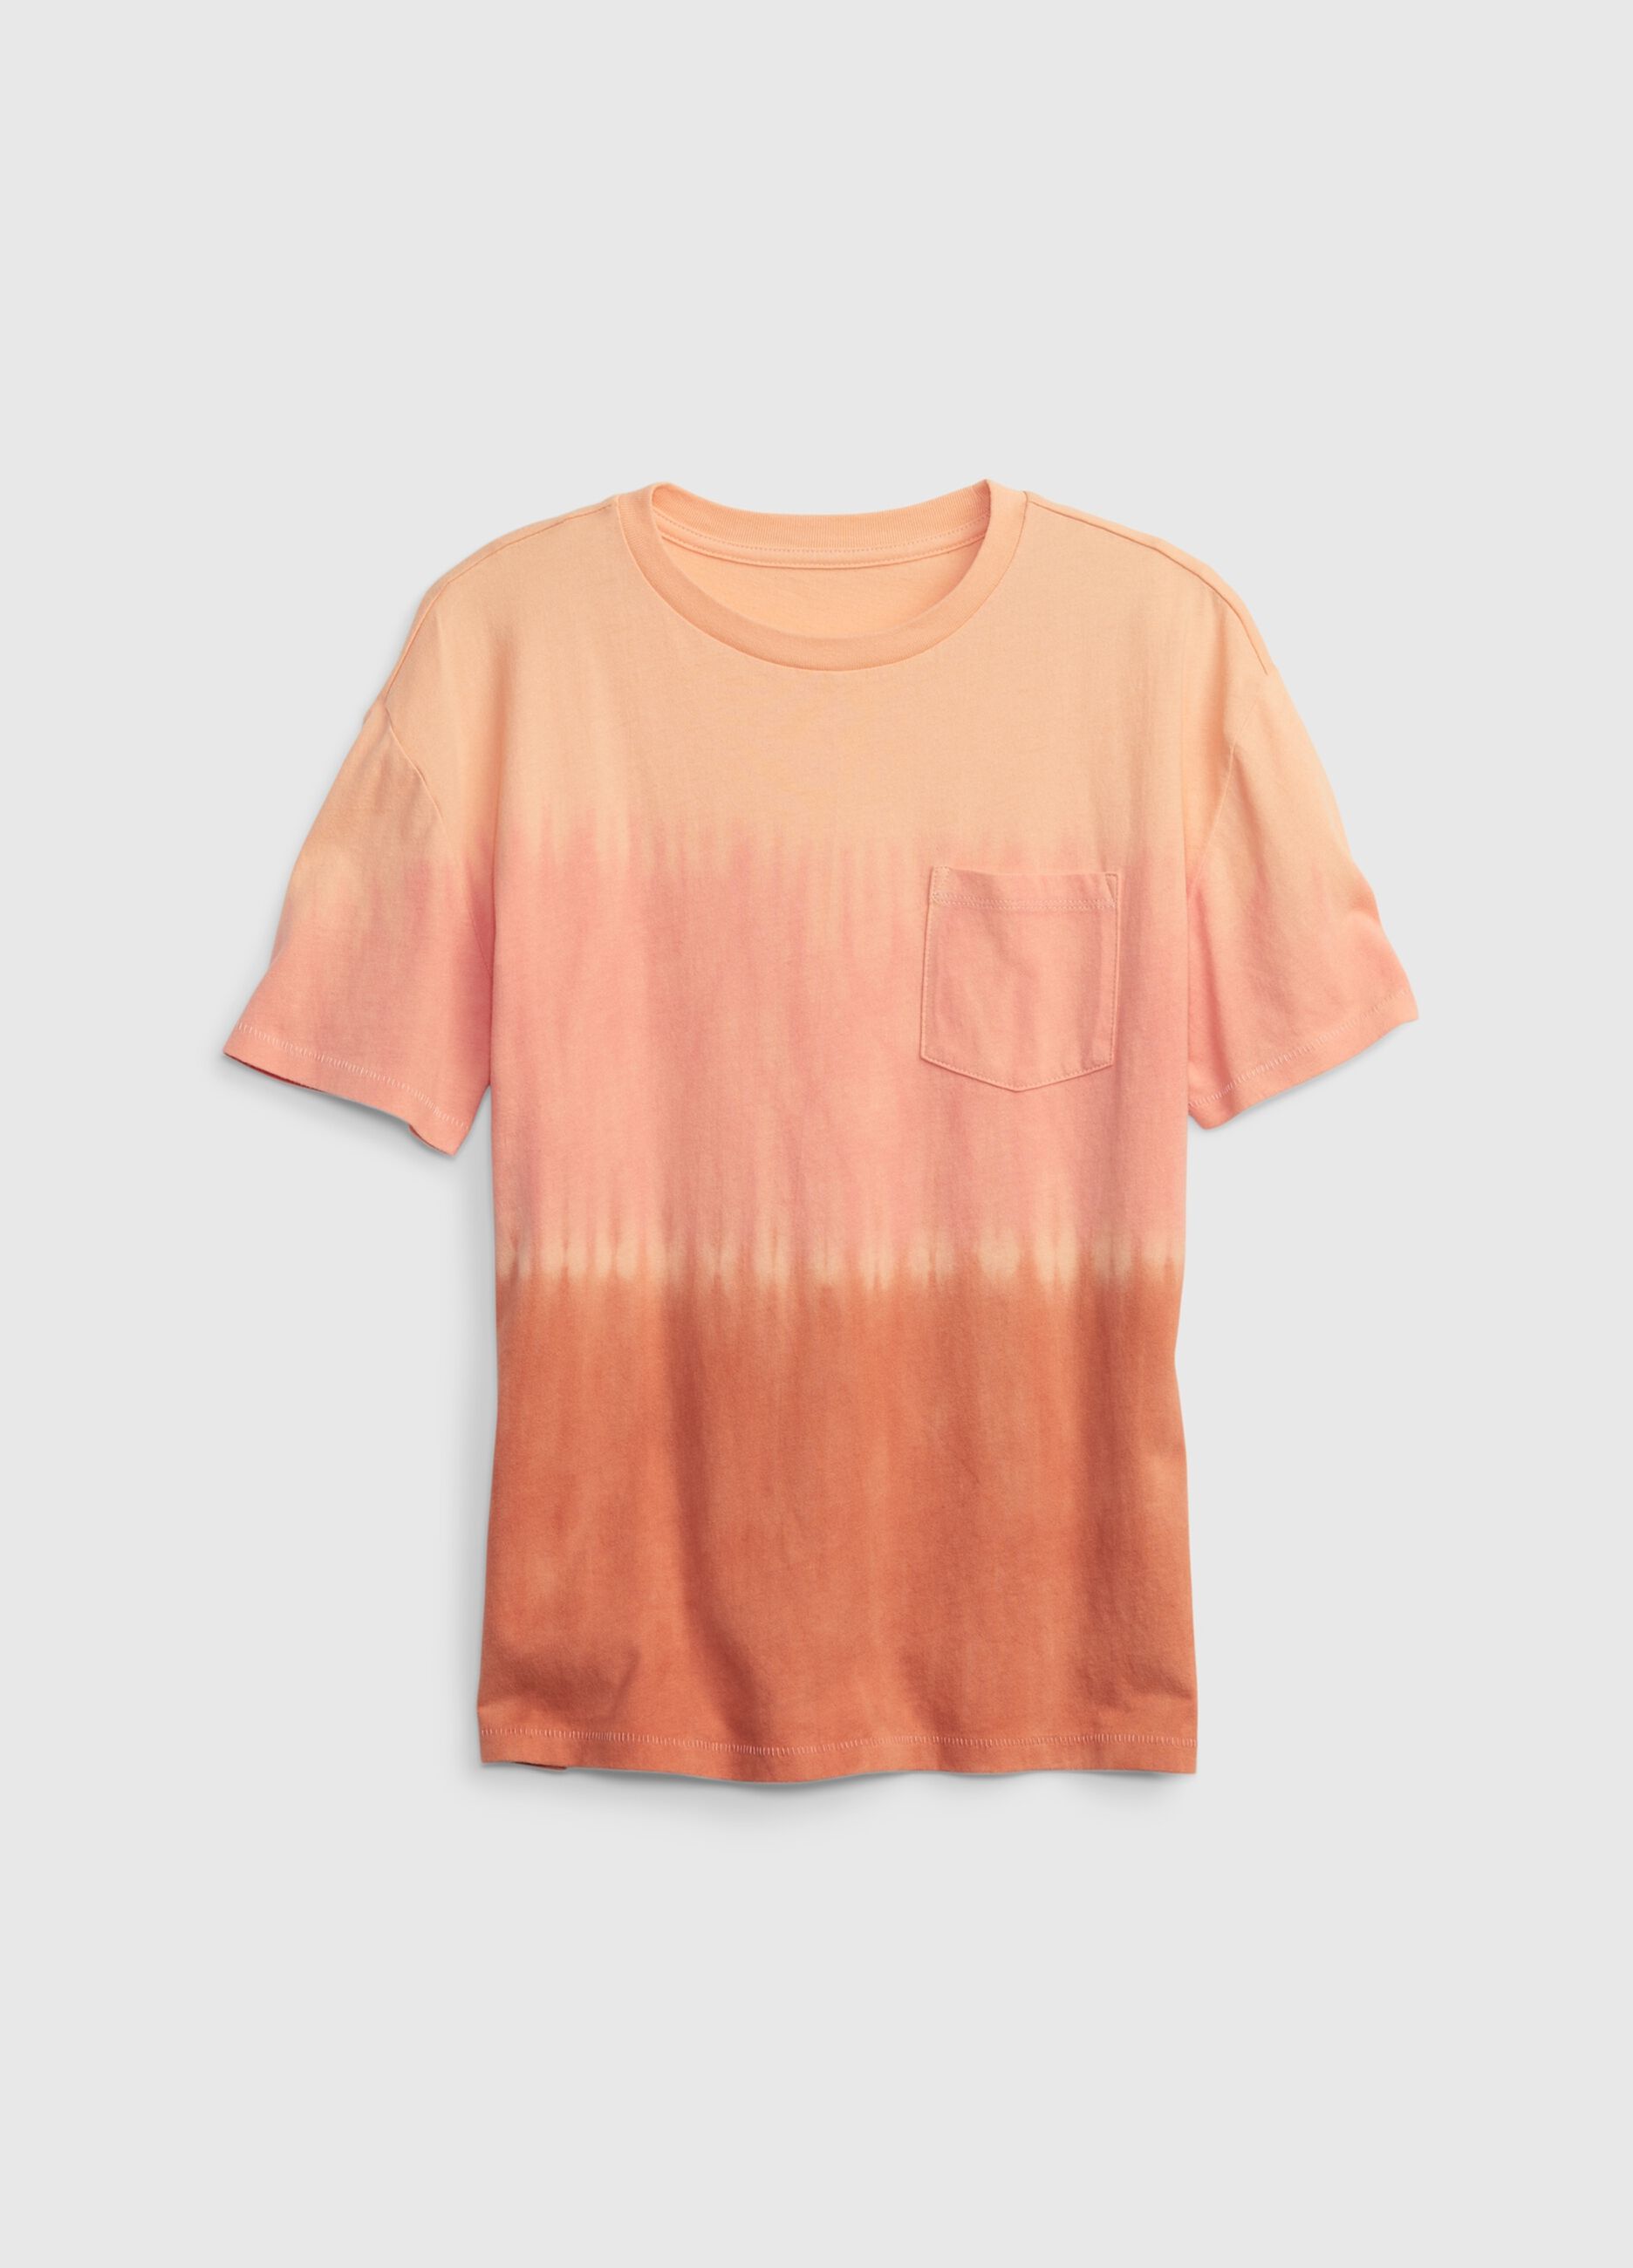 Tie Dye T-shirt with pocket